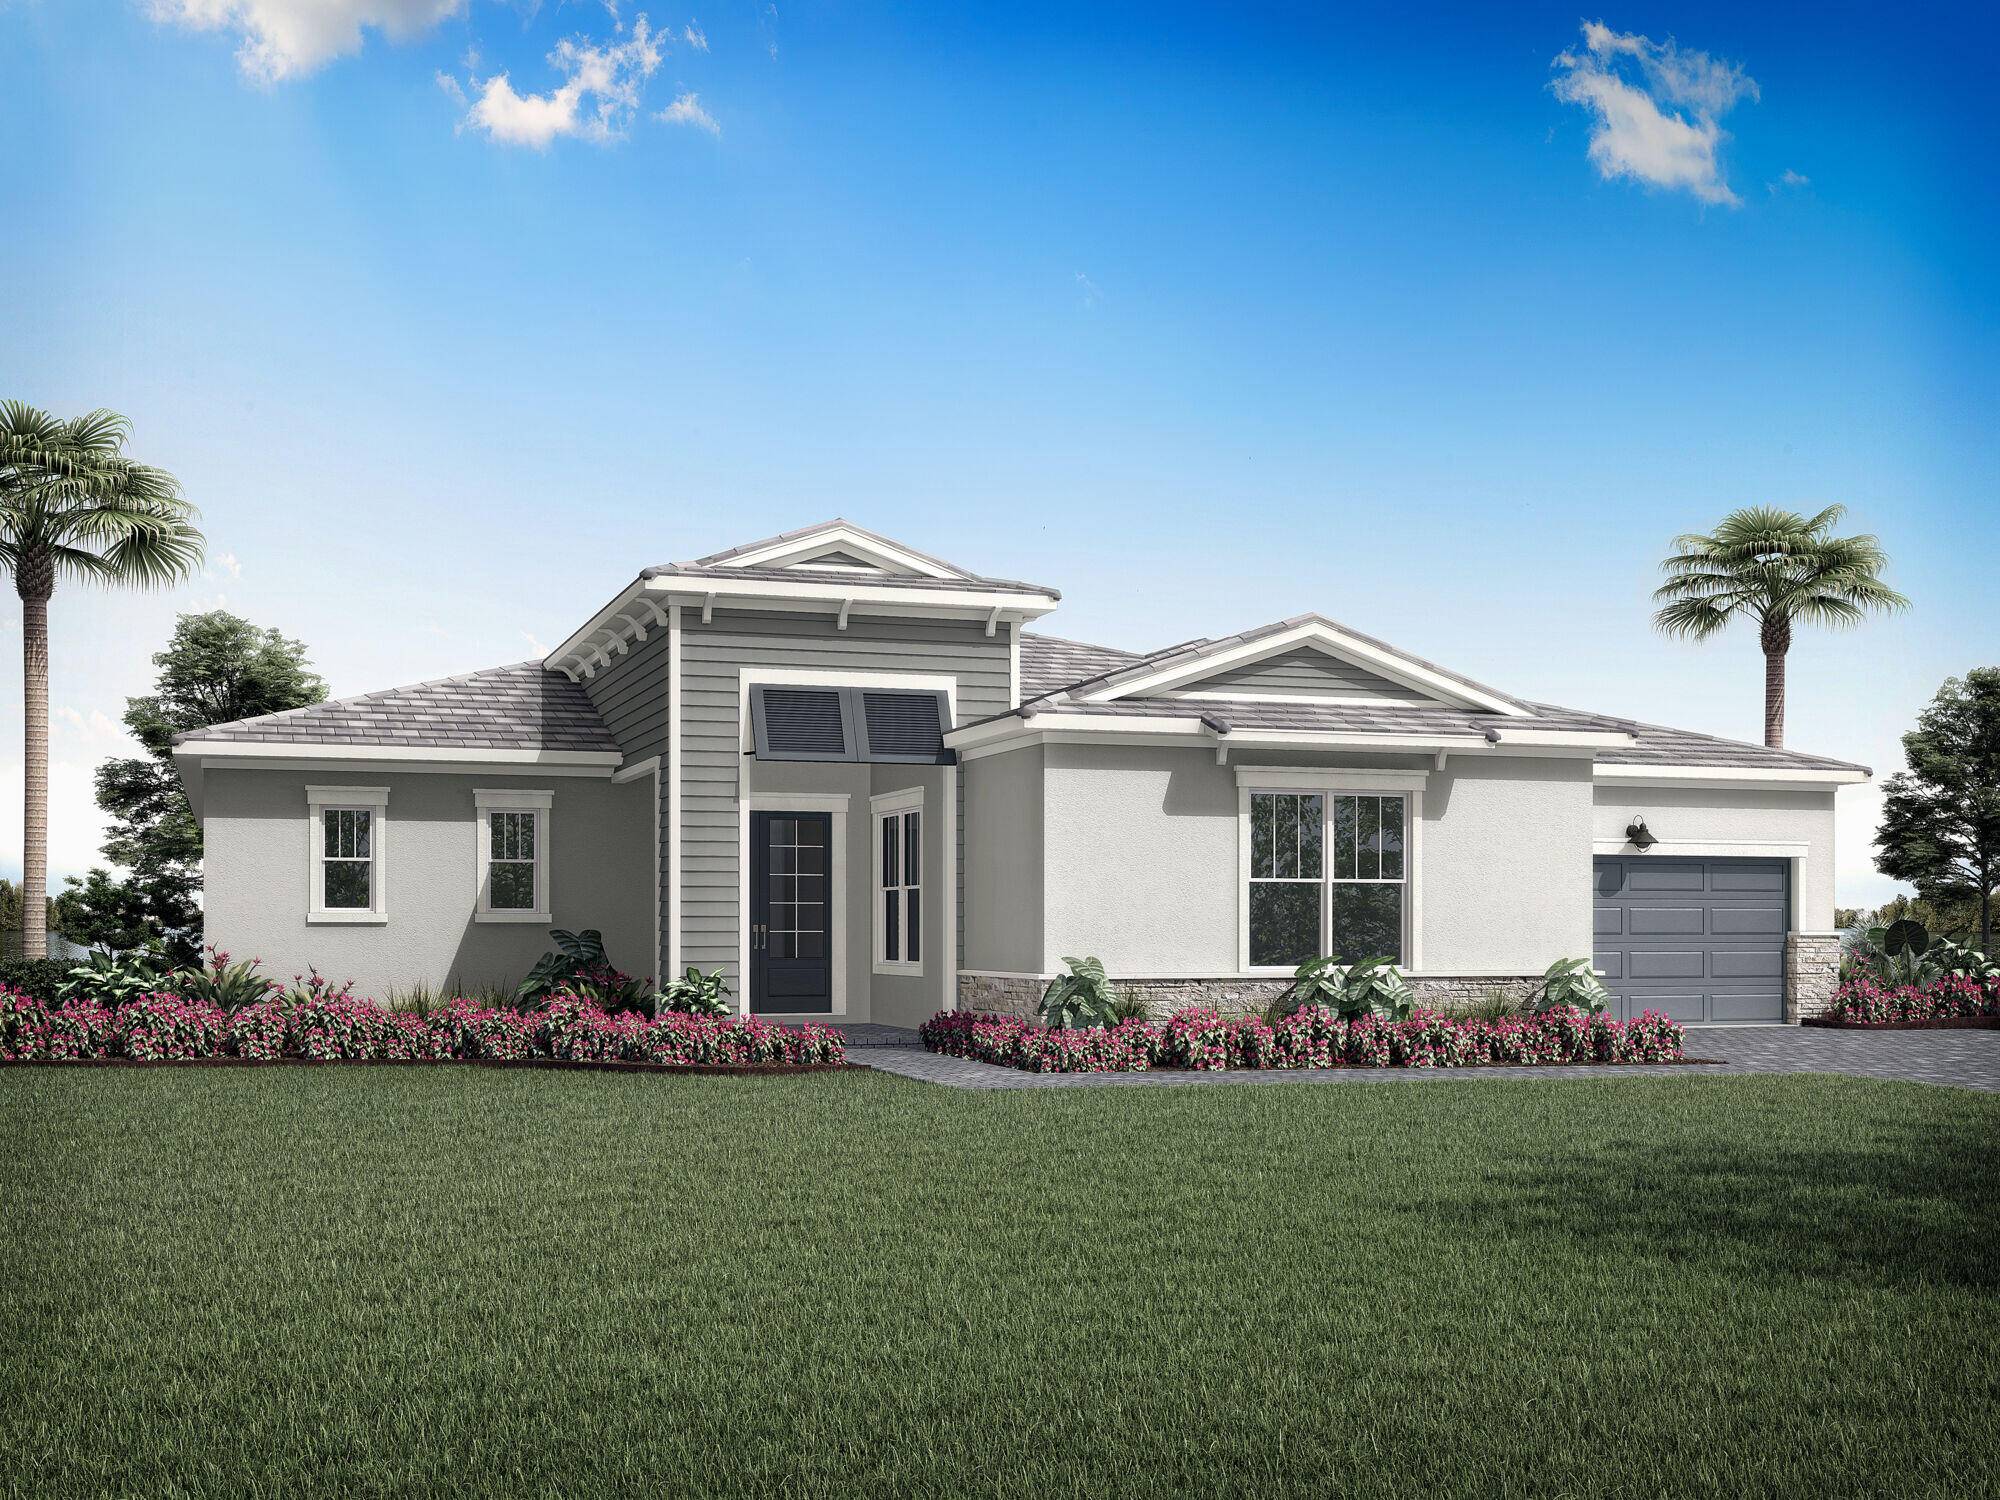 The 2, 809 square foot Conrad floorplan offers comfortable, spacious living space in an attractive, one story configuration.